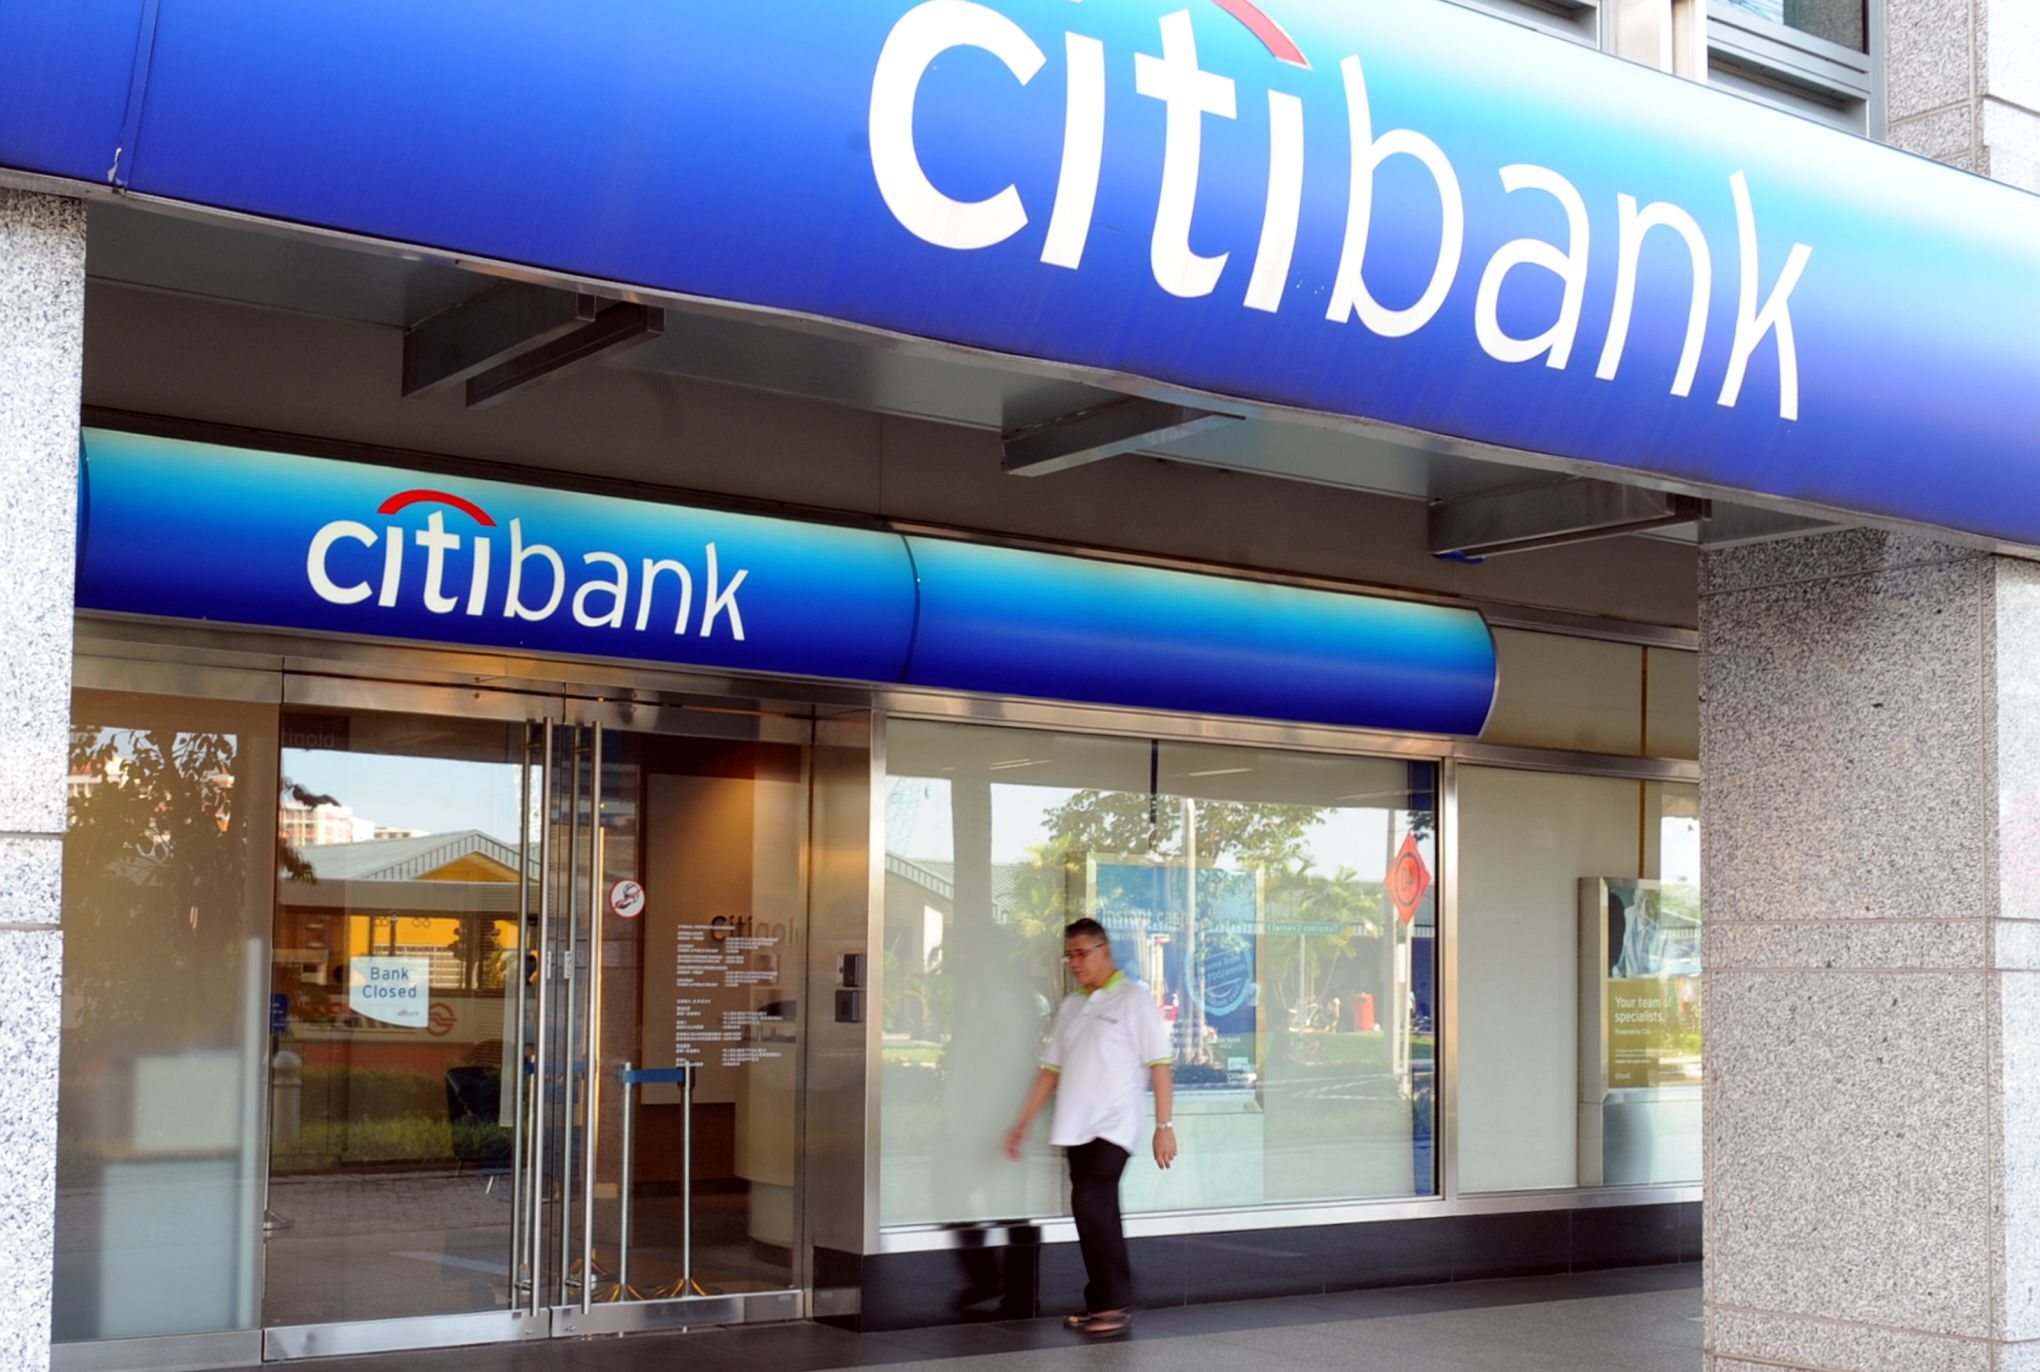 What is citi bank a global or us bank - kmfkwild